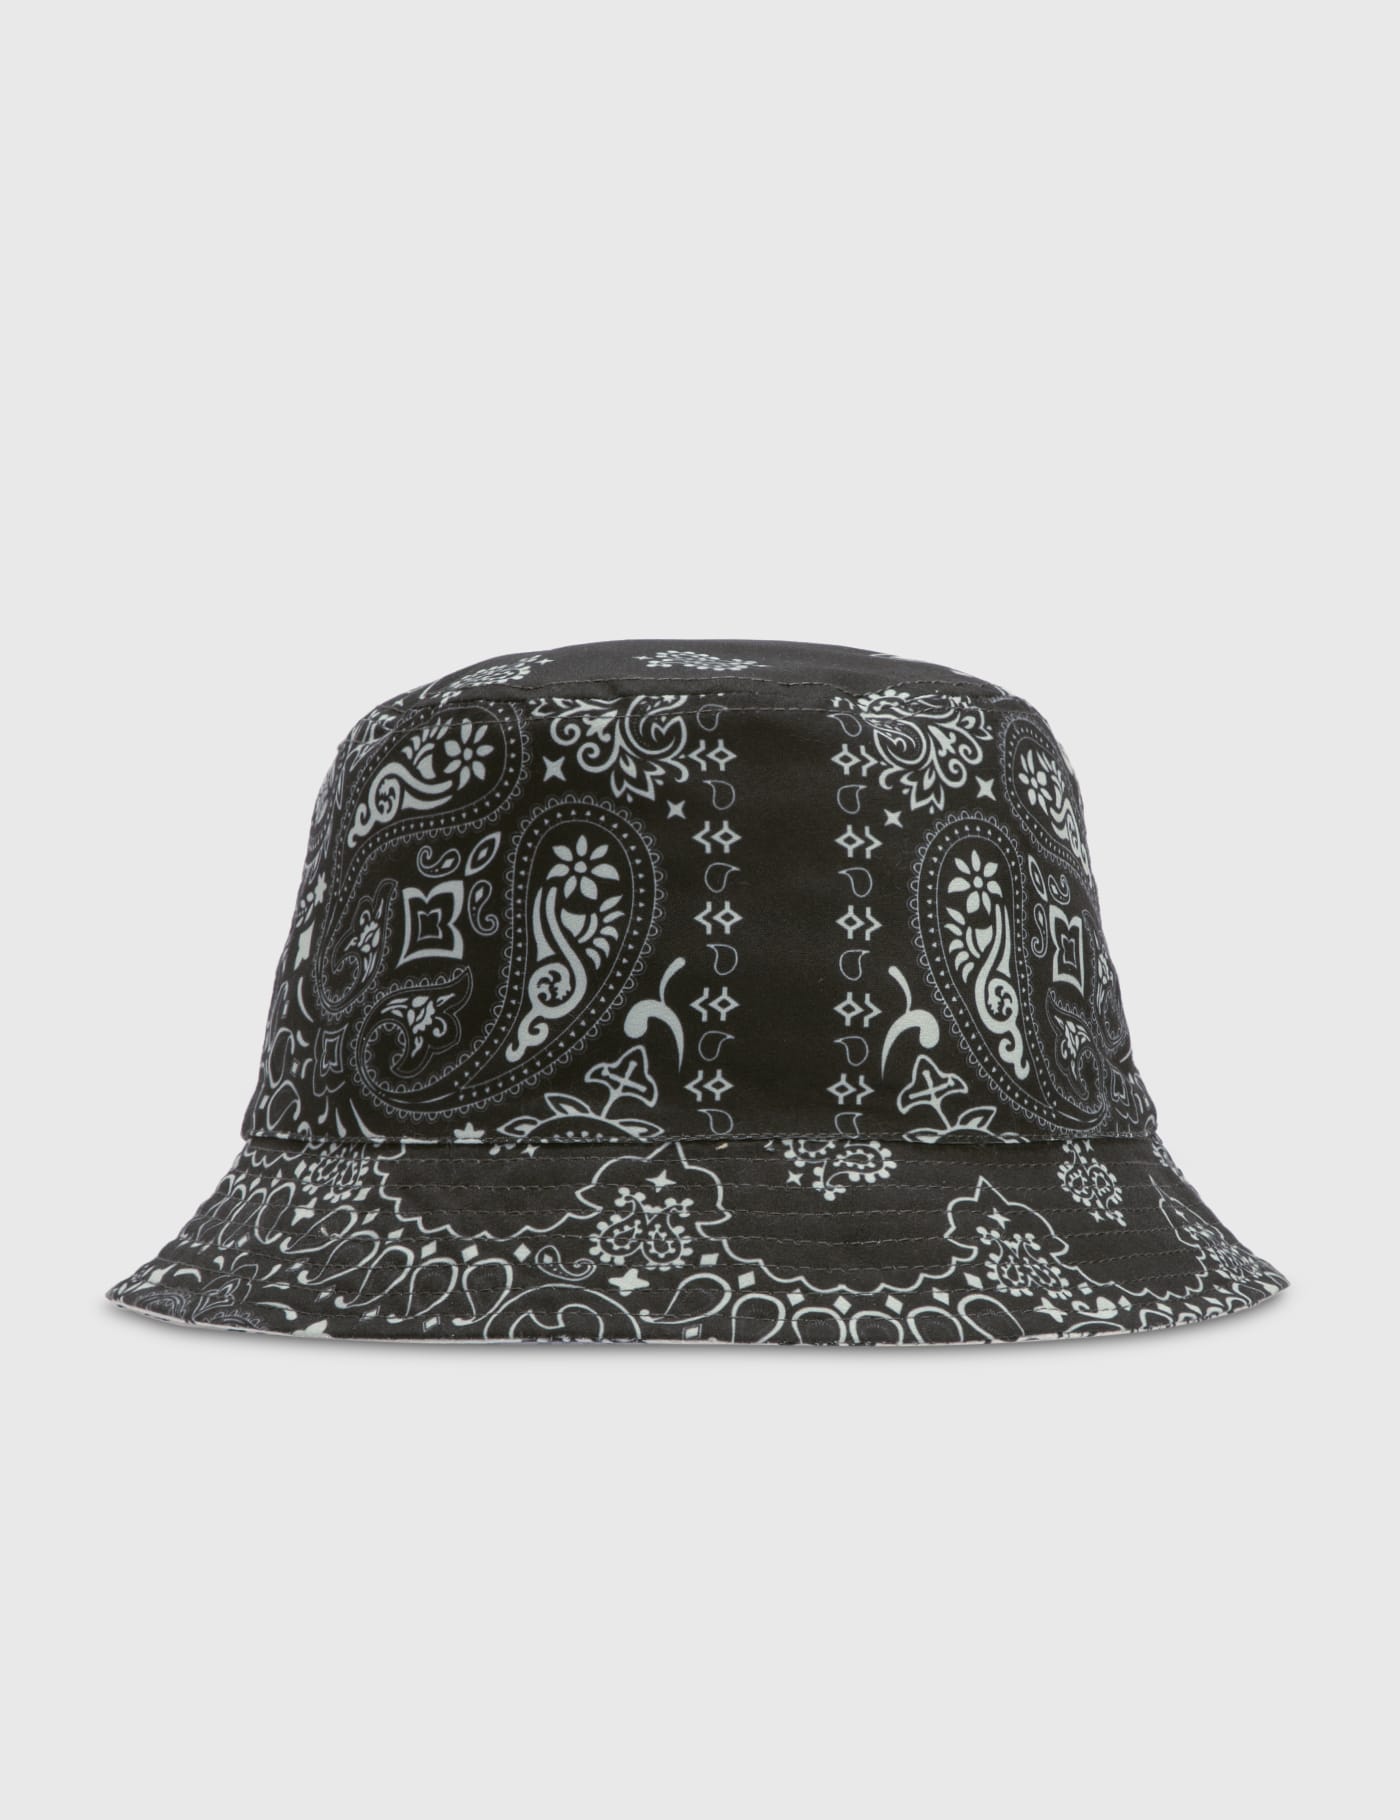 Needles - Sailor Hat | HBX - Globally Curated Fashion and 